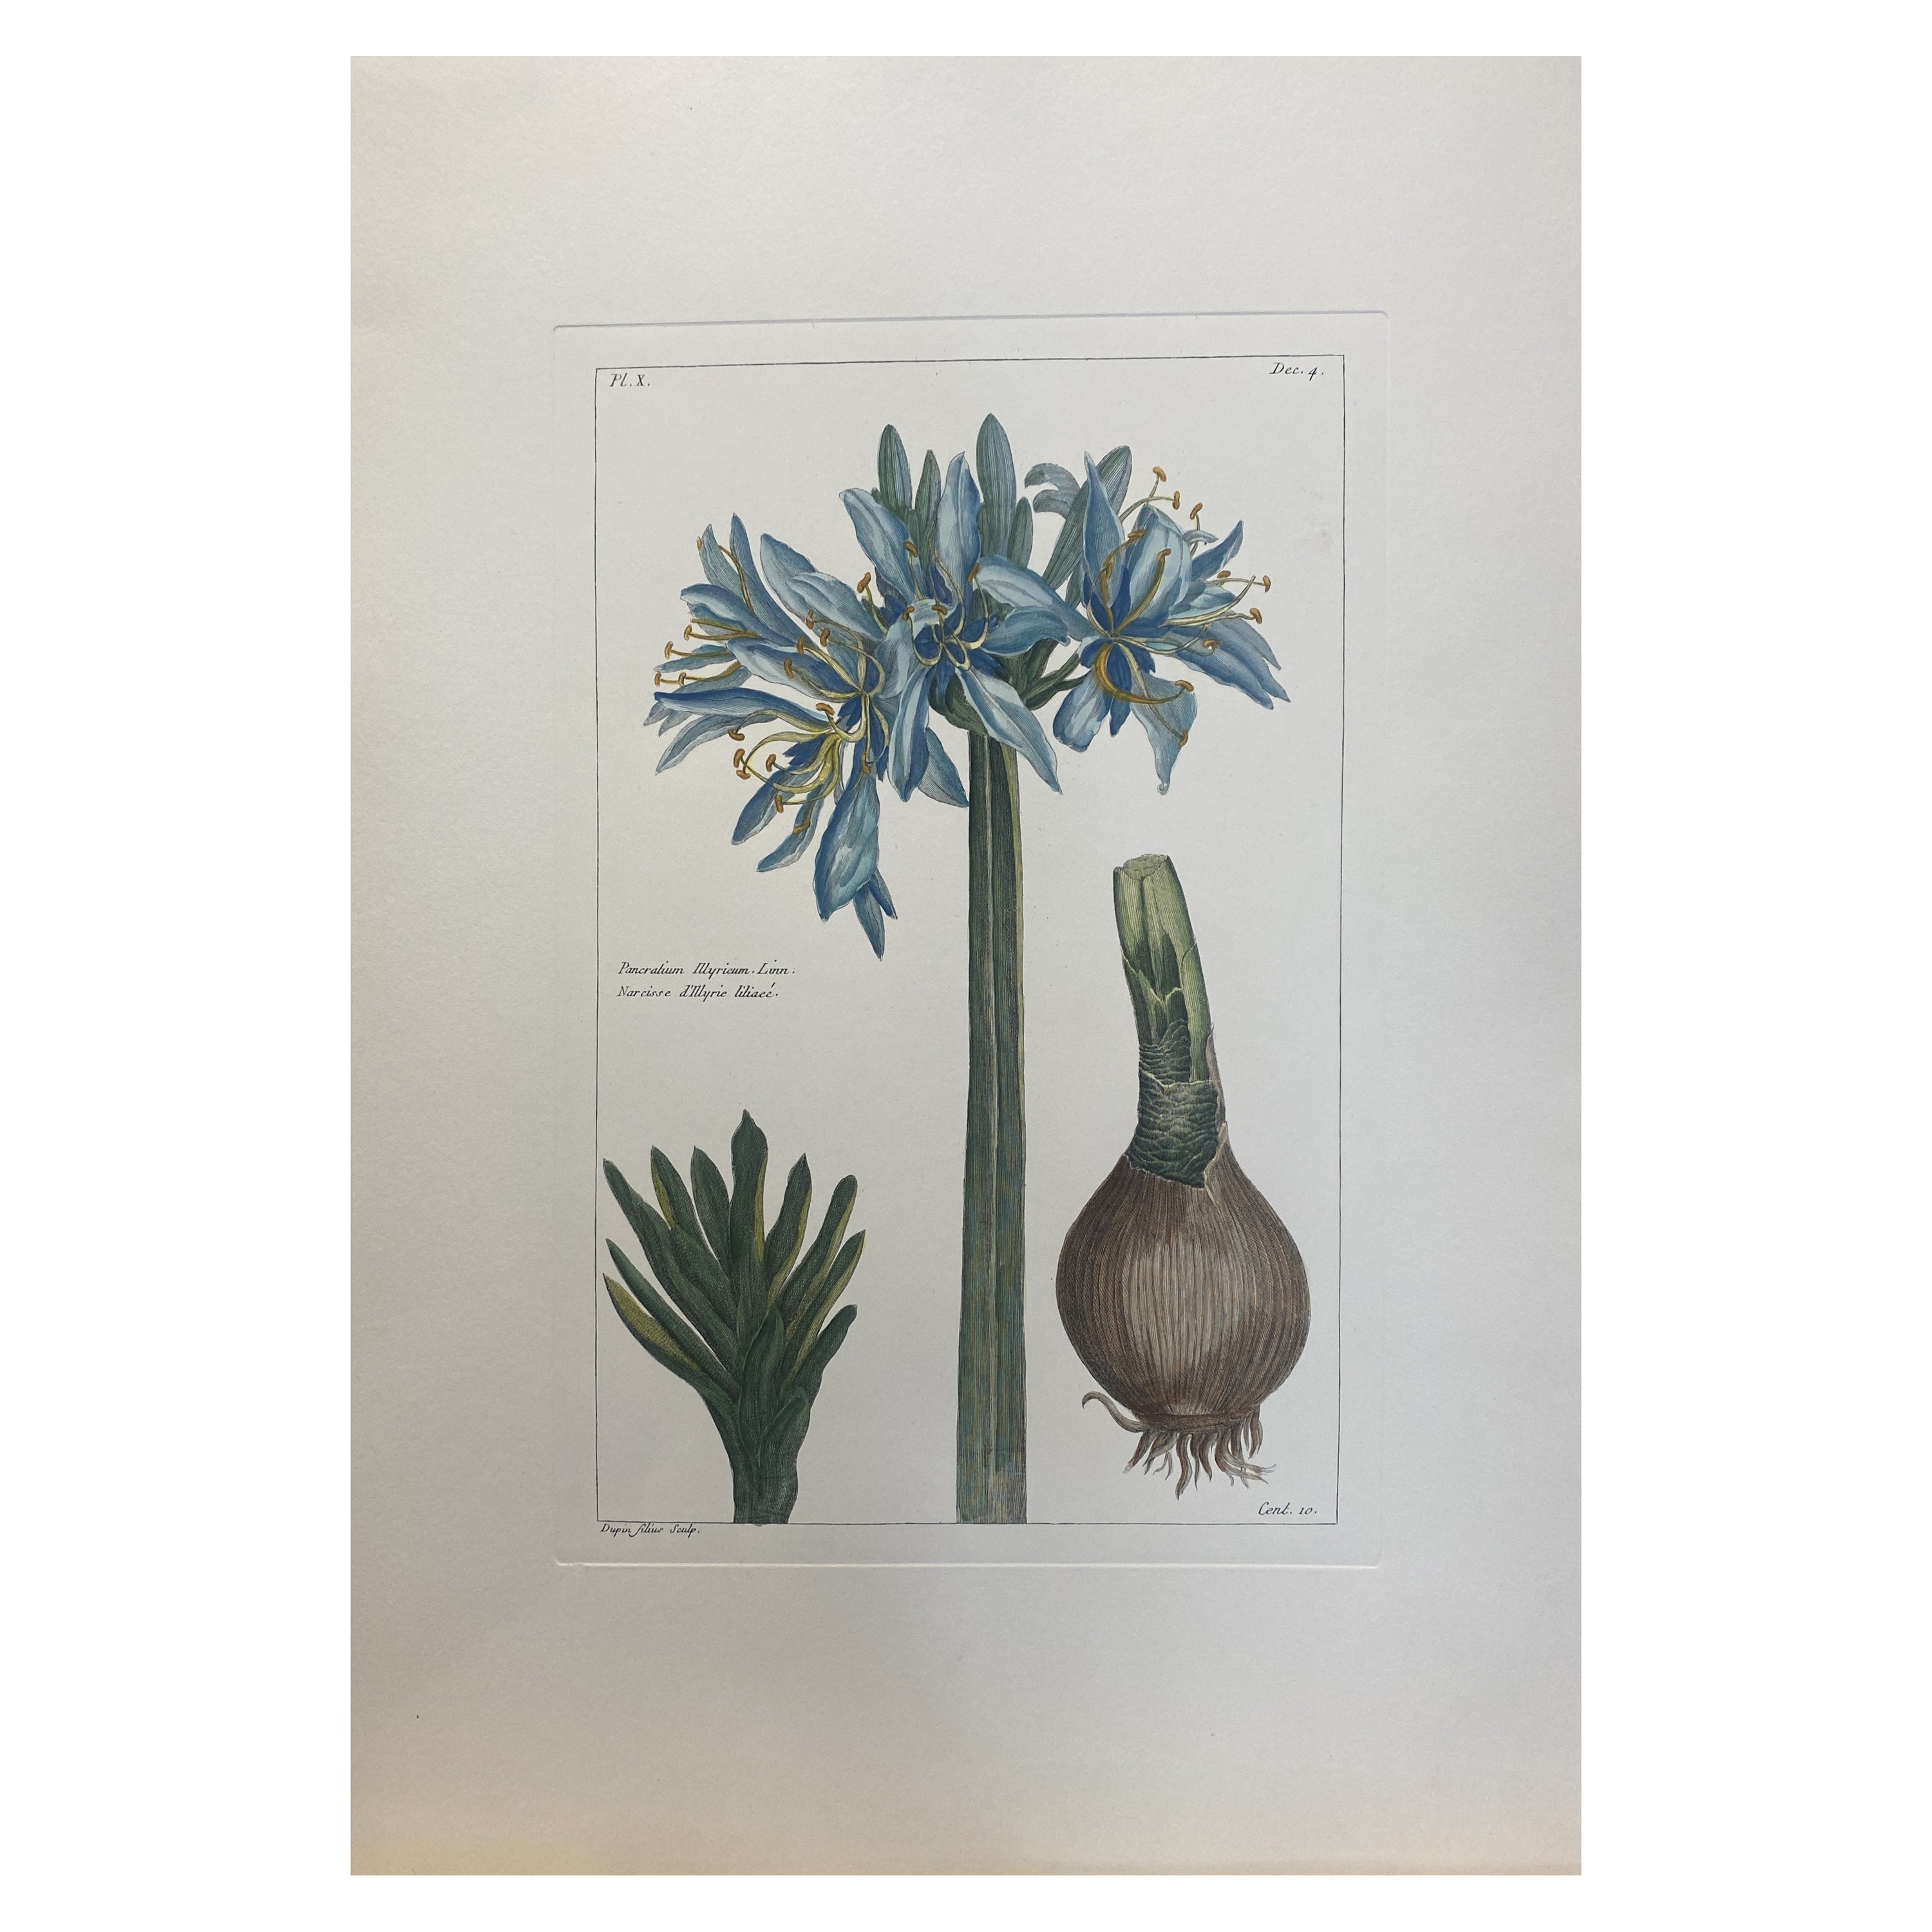 Italian Contemporary Hand Painted Botanical Print "Narcissè d'Illyrie Liliaceè"  For Sale